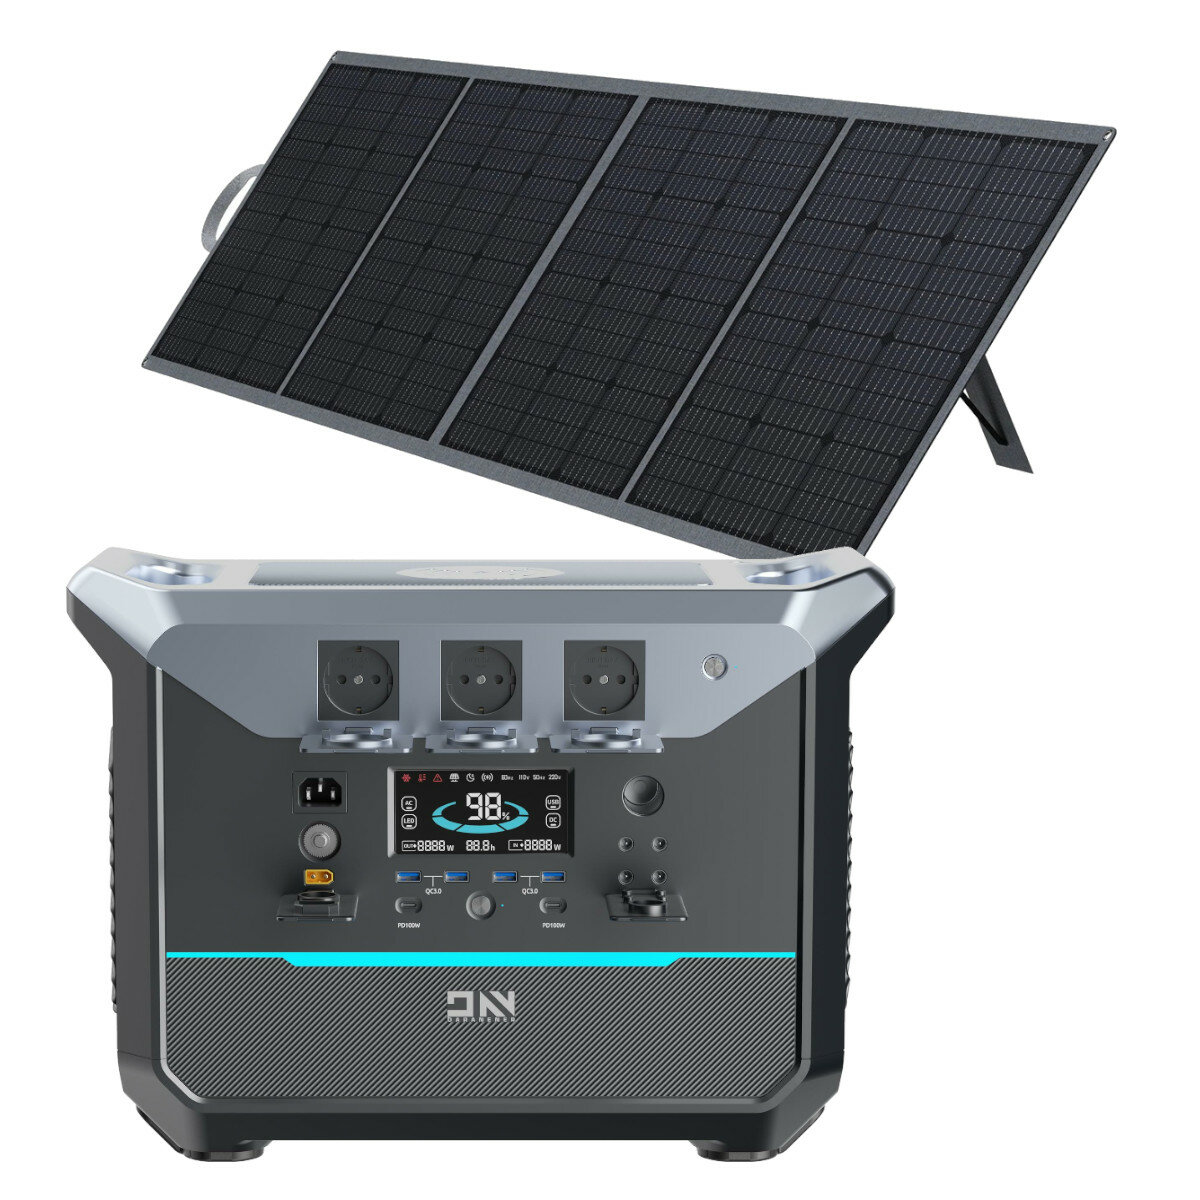 best price,daranener,neo2000,2000w,2073.6wh,power,station,with,sp300,300w,etfe,solar,paner,eu,coupon,price,discount